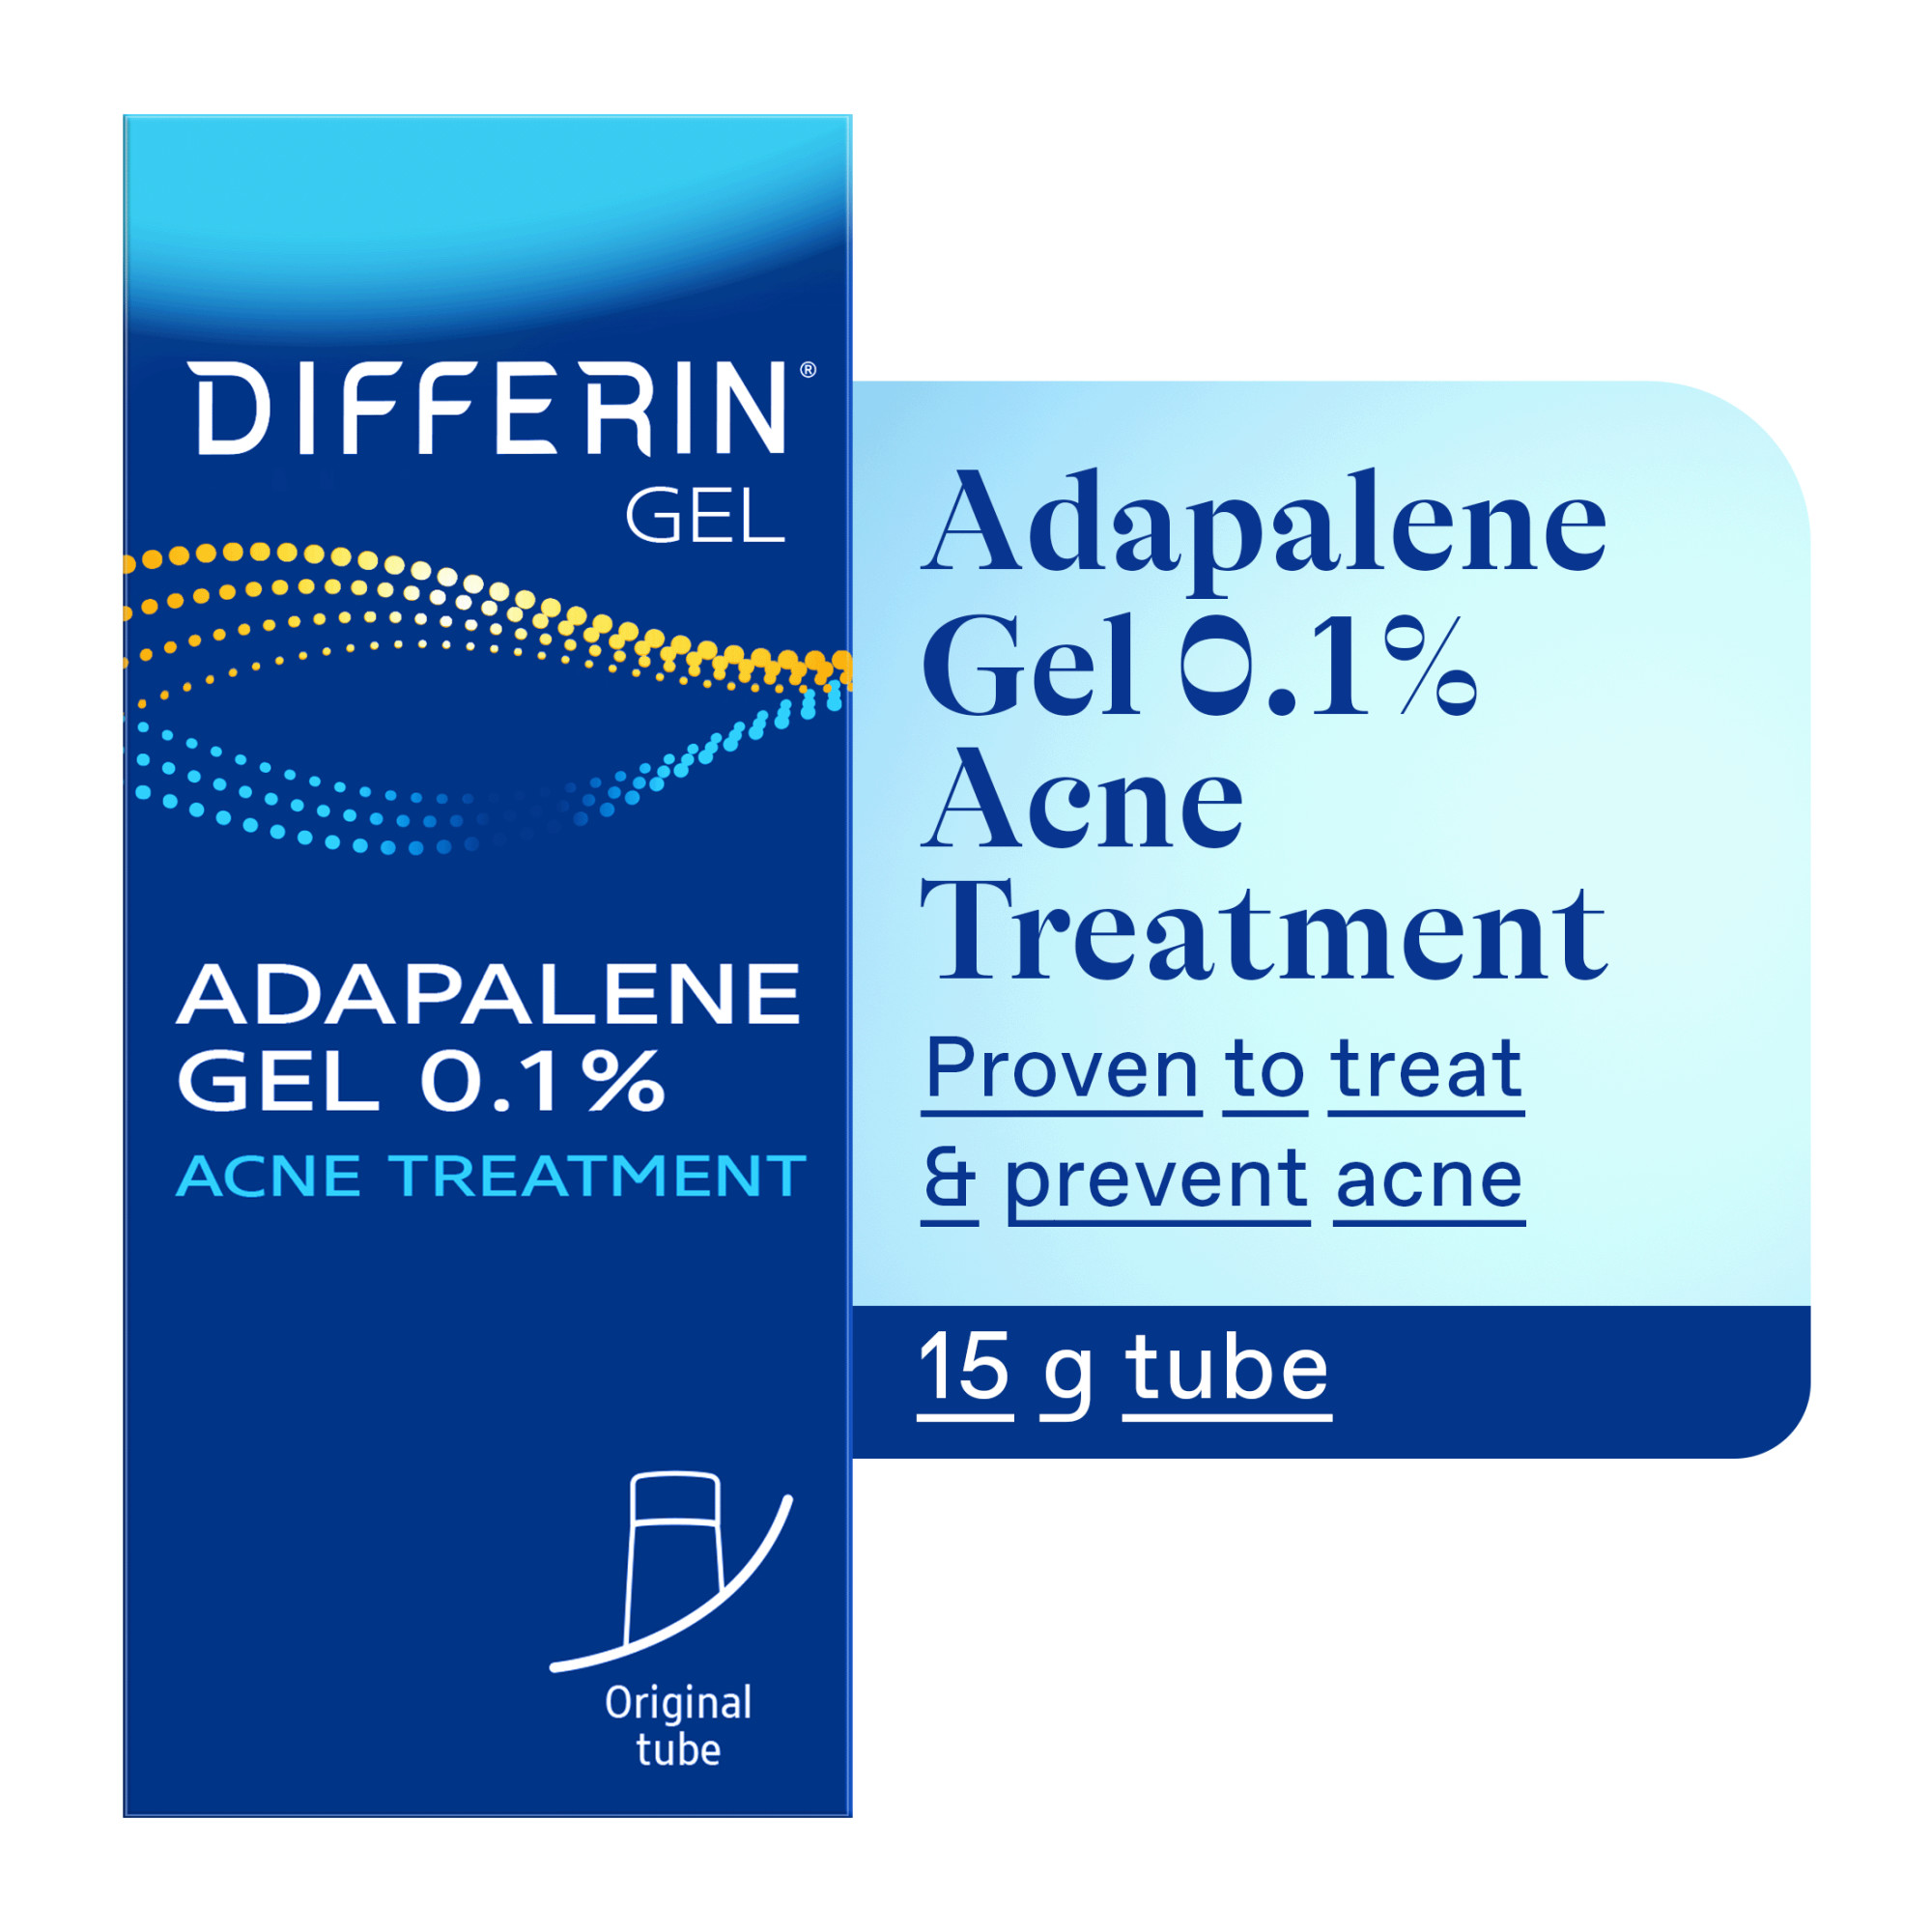 Differin Acne Treatment Gel, Retinoid Treatment for Face with 0.1% Adapalene, 15g Tube - image 1 of 12